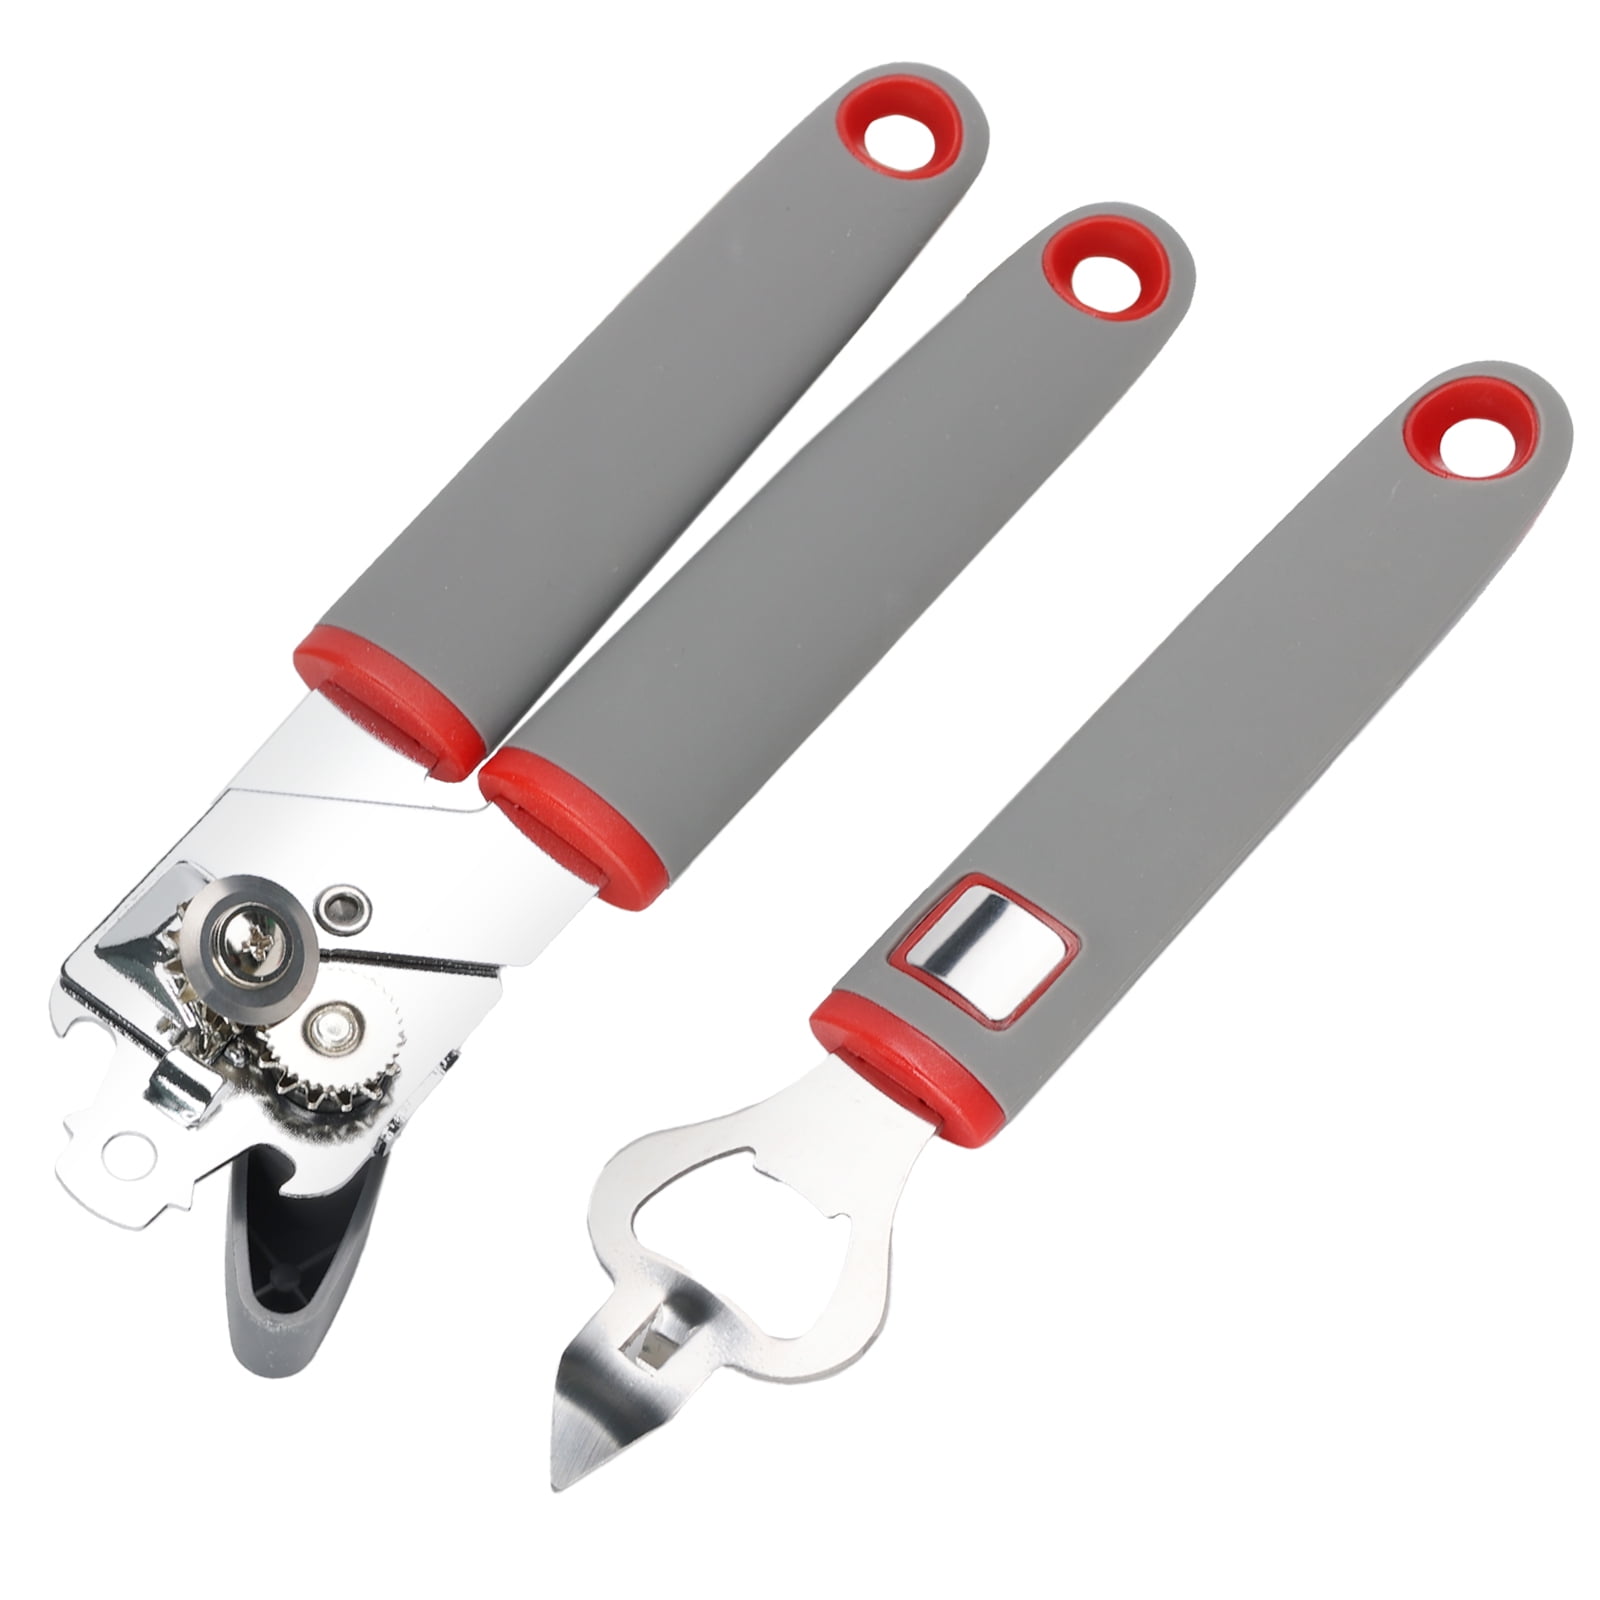 2pcs/set Silicone 5 In 1 Can Opener, Creative Two Tone Multi